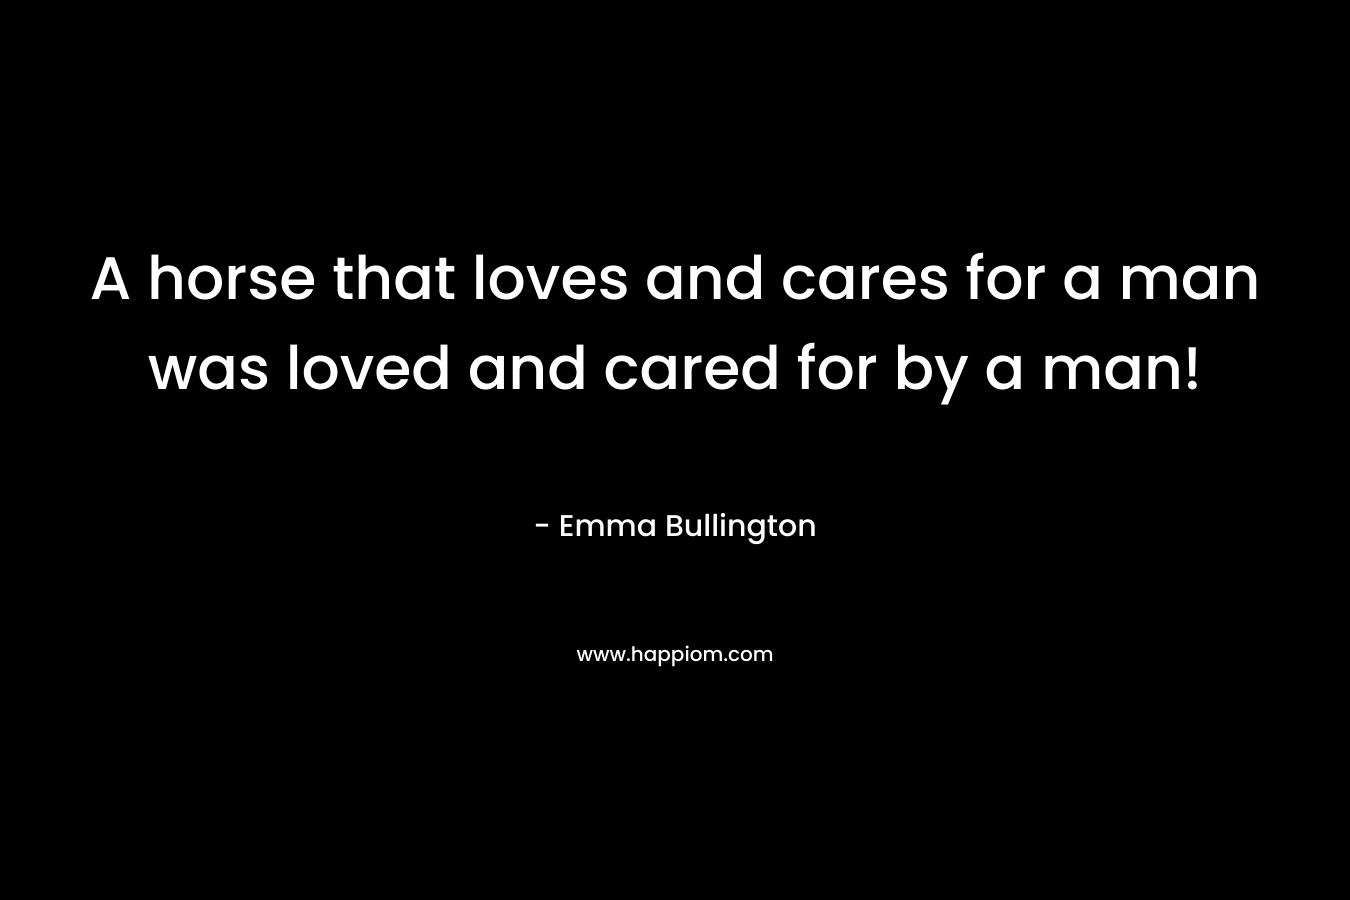 A horse that loves and cares for a man was loved and cared for by a man! – Emma Bullington